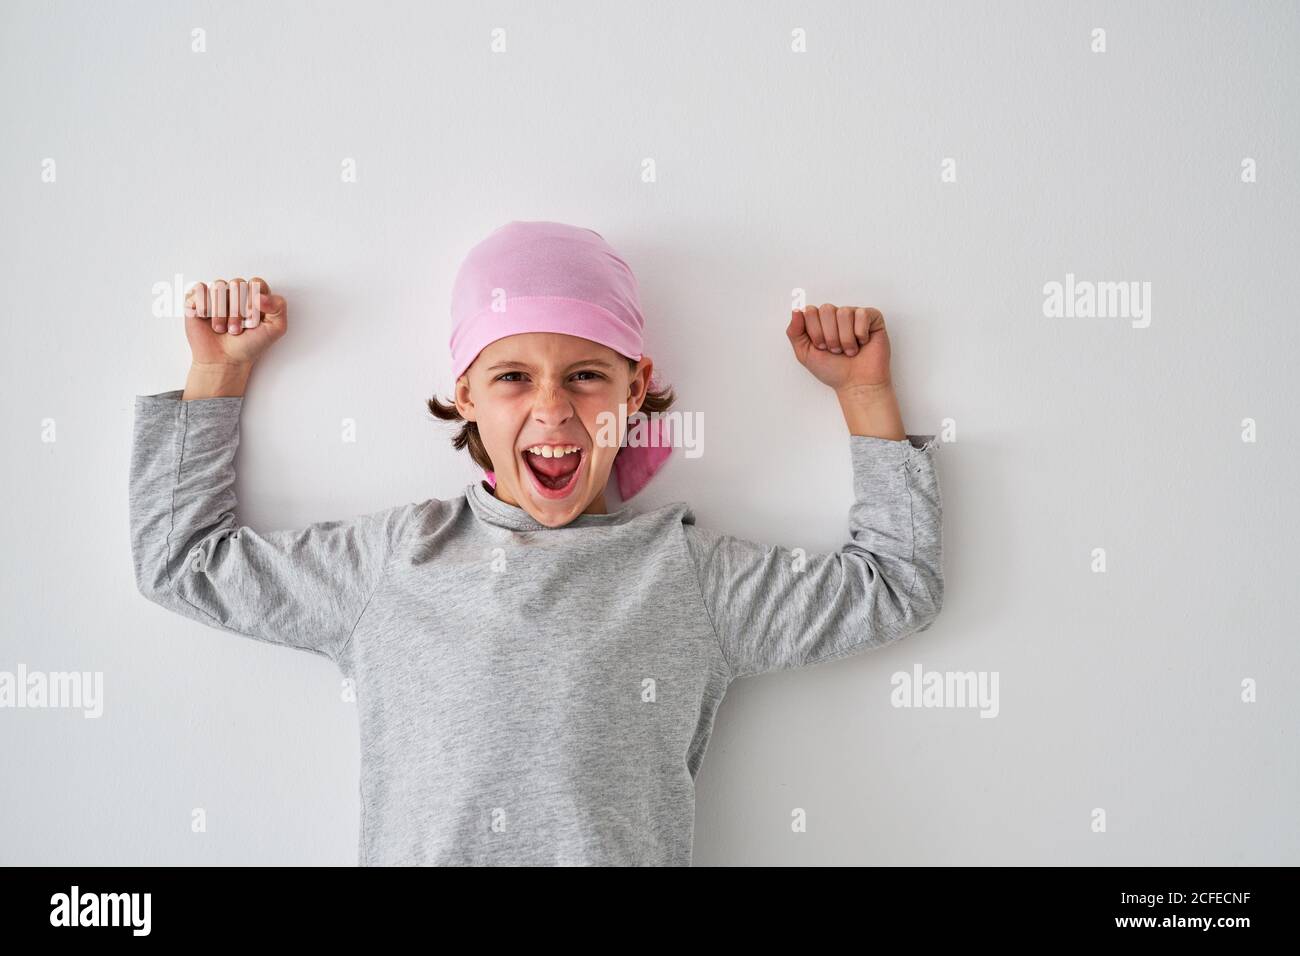 Brave small child with cancer diagnosis looking at camera and screaming while raising fists up on gray background Stock Photo